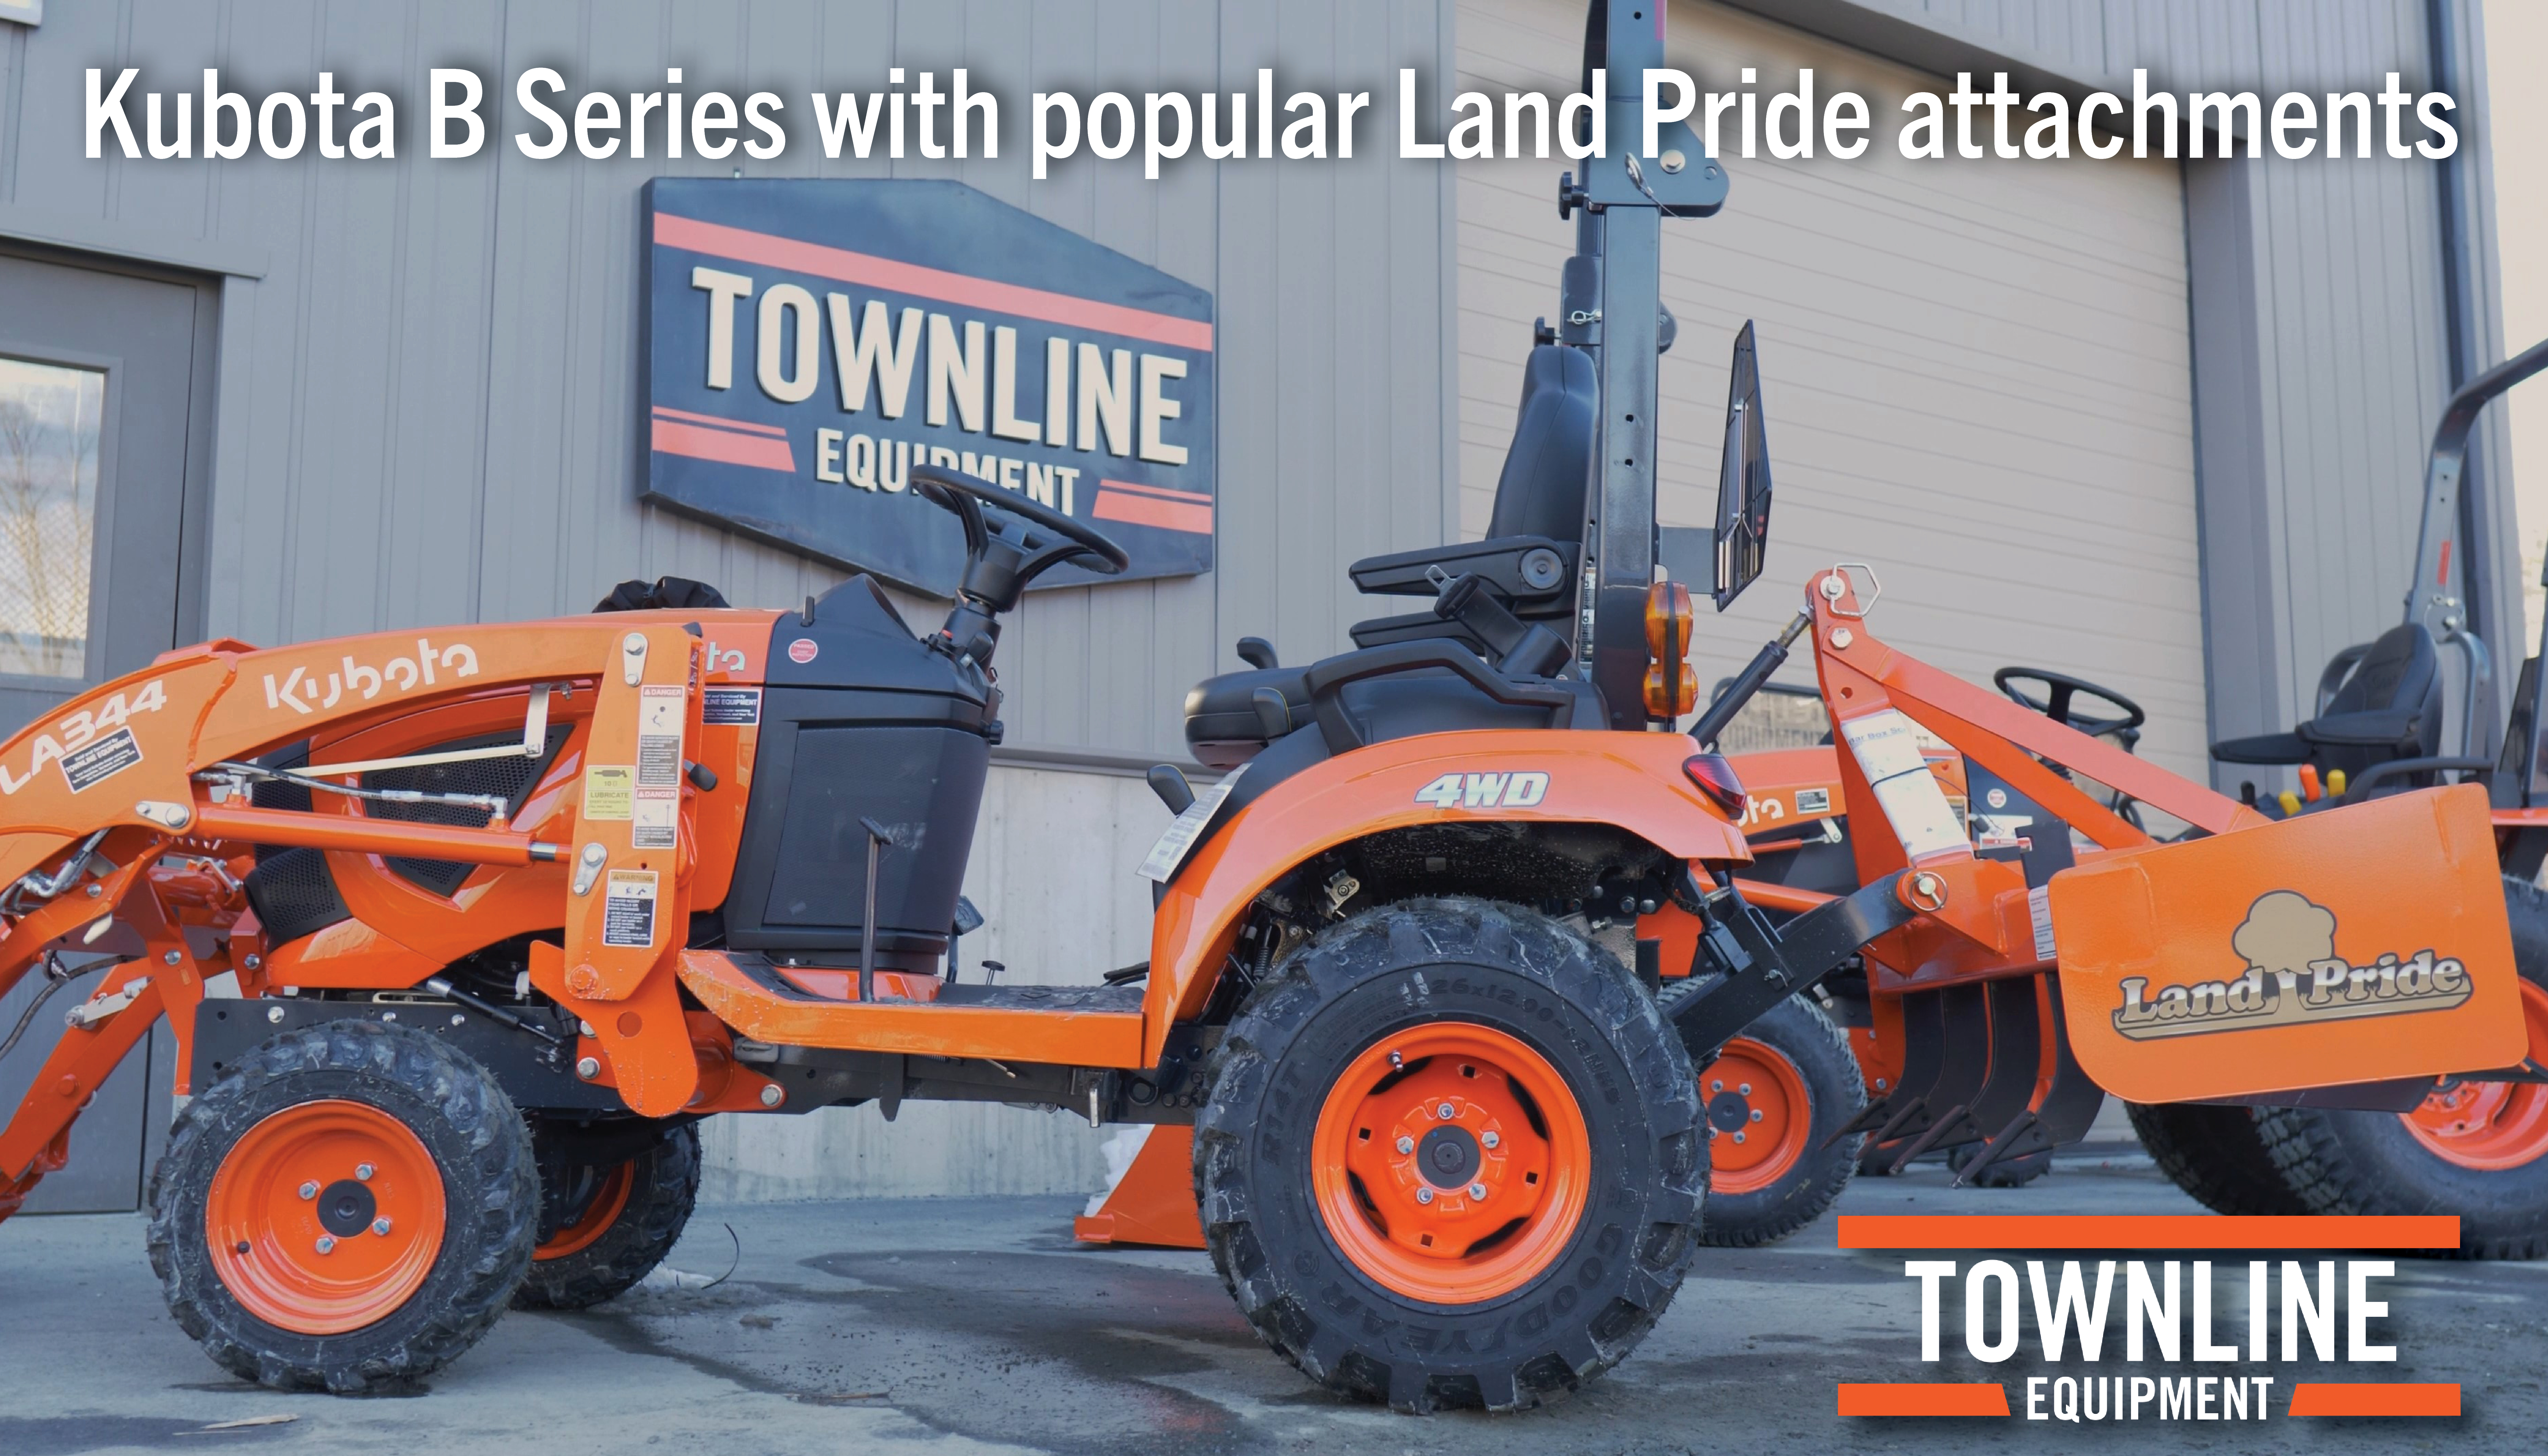 Kubota B Series in action with Land Pride Attachments